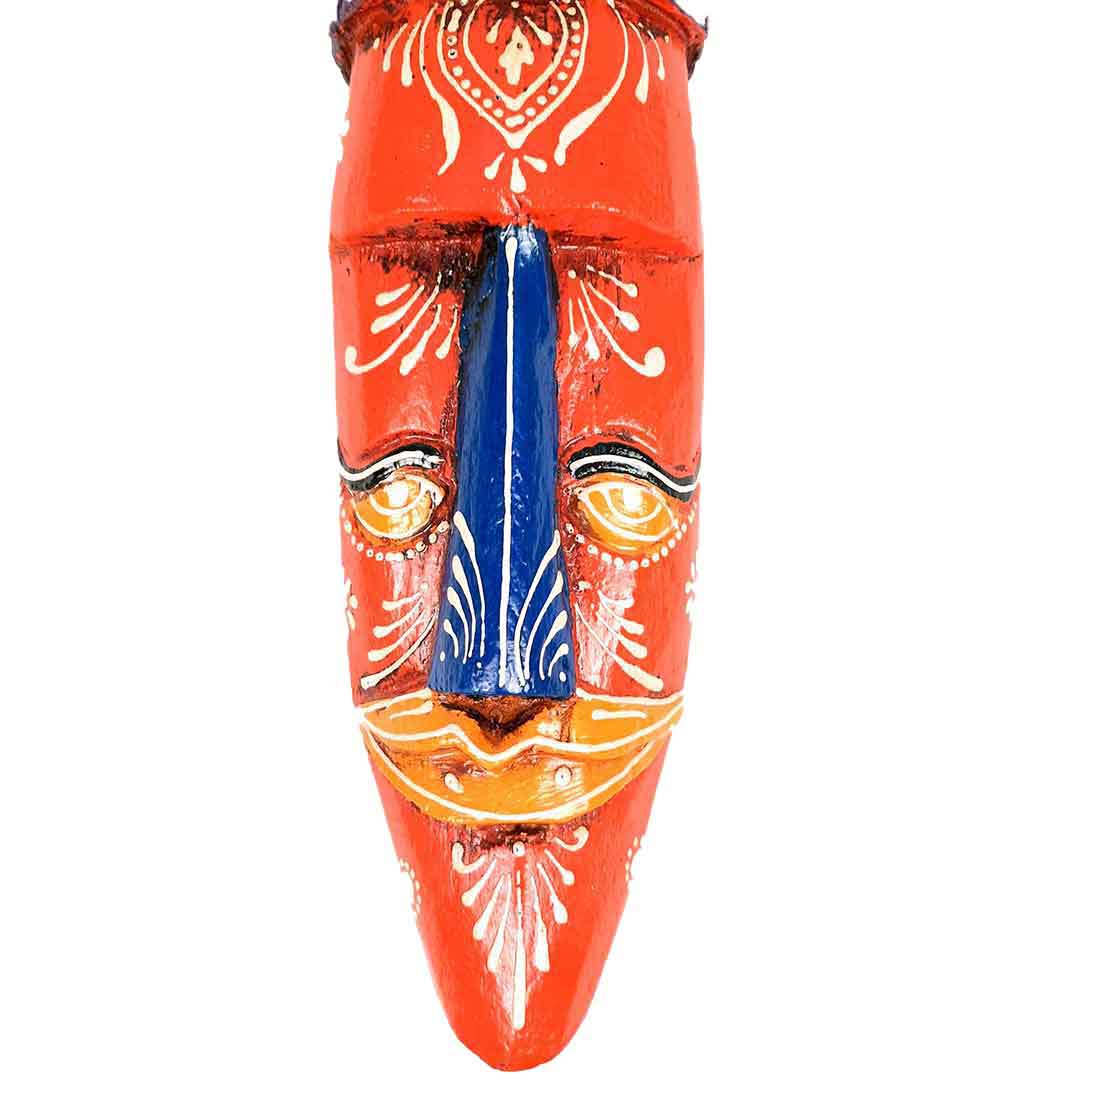 Traditional Tribal Art Mask Wall Hanging - For Home, Entrance & Office Decor - 12 Inch